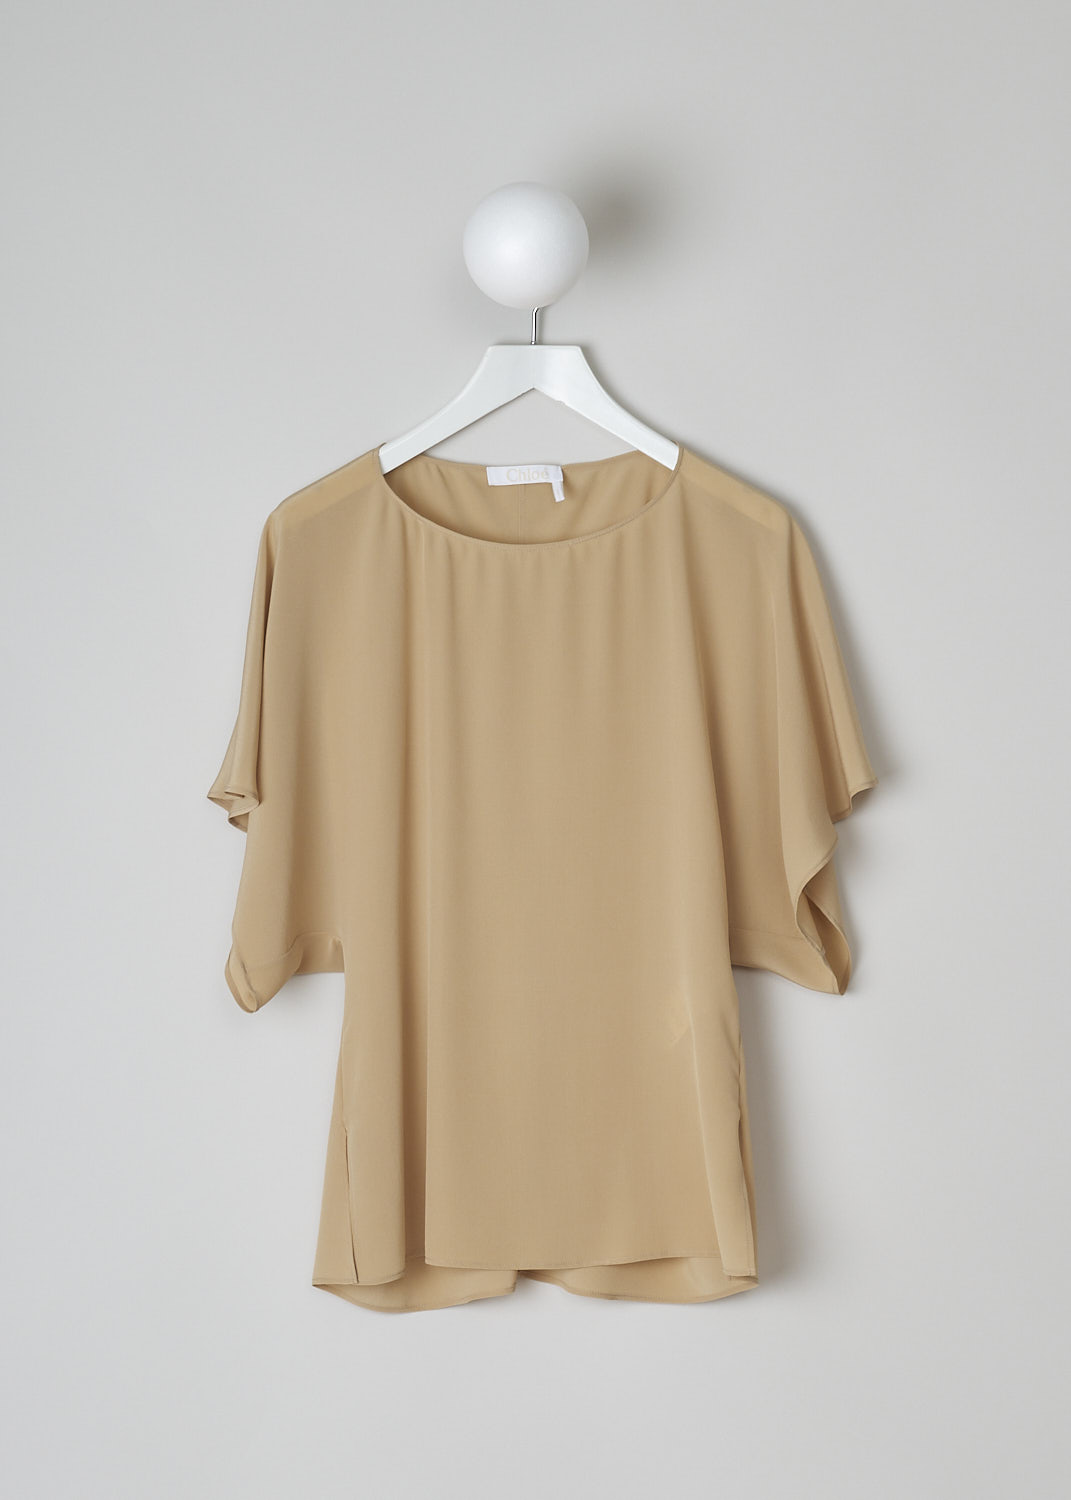 CHLOÉ, PEARL BEIGE SILK TOP, CHC22UHT12004278,  Beige, Front, This pearl beige silk top has a boat neckline and loose short cap sleeves. The top has side slits and a straight hemline. 
